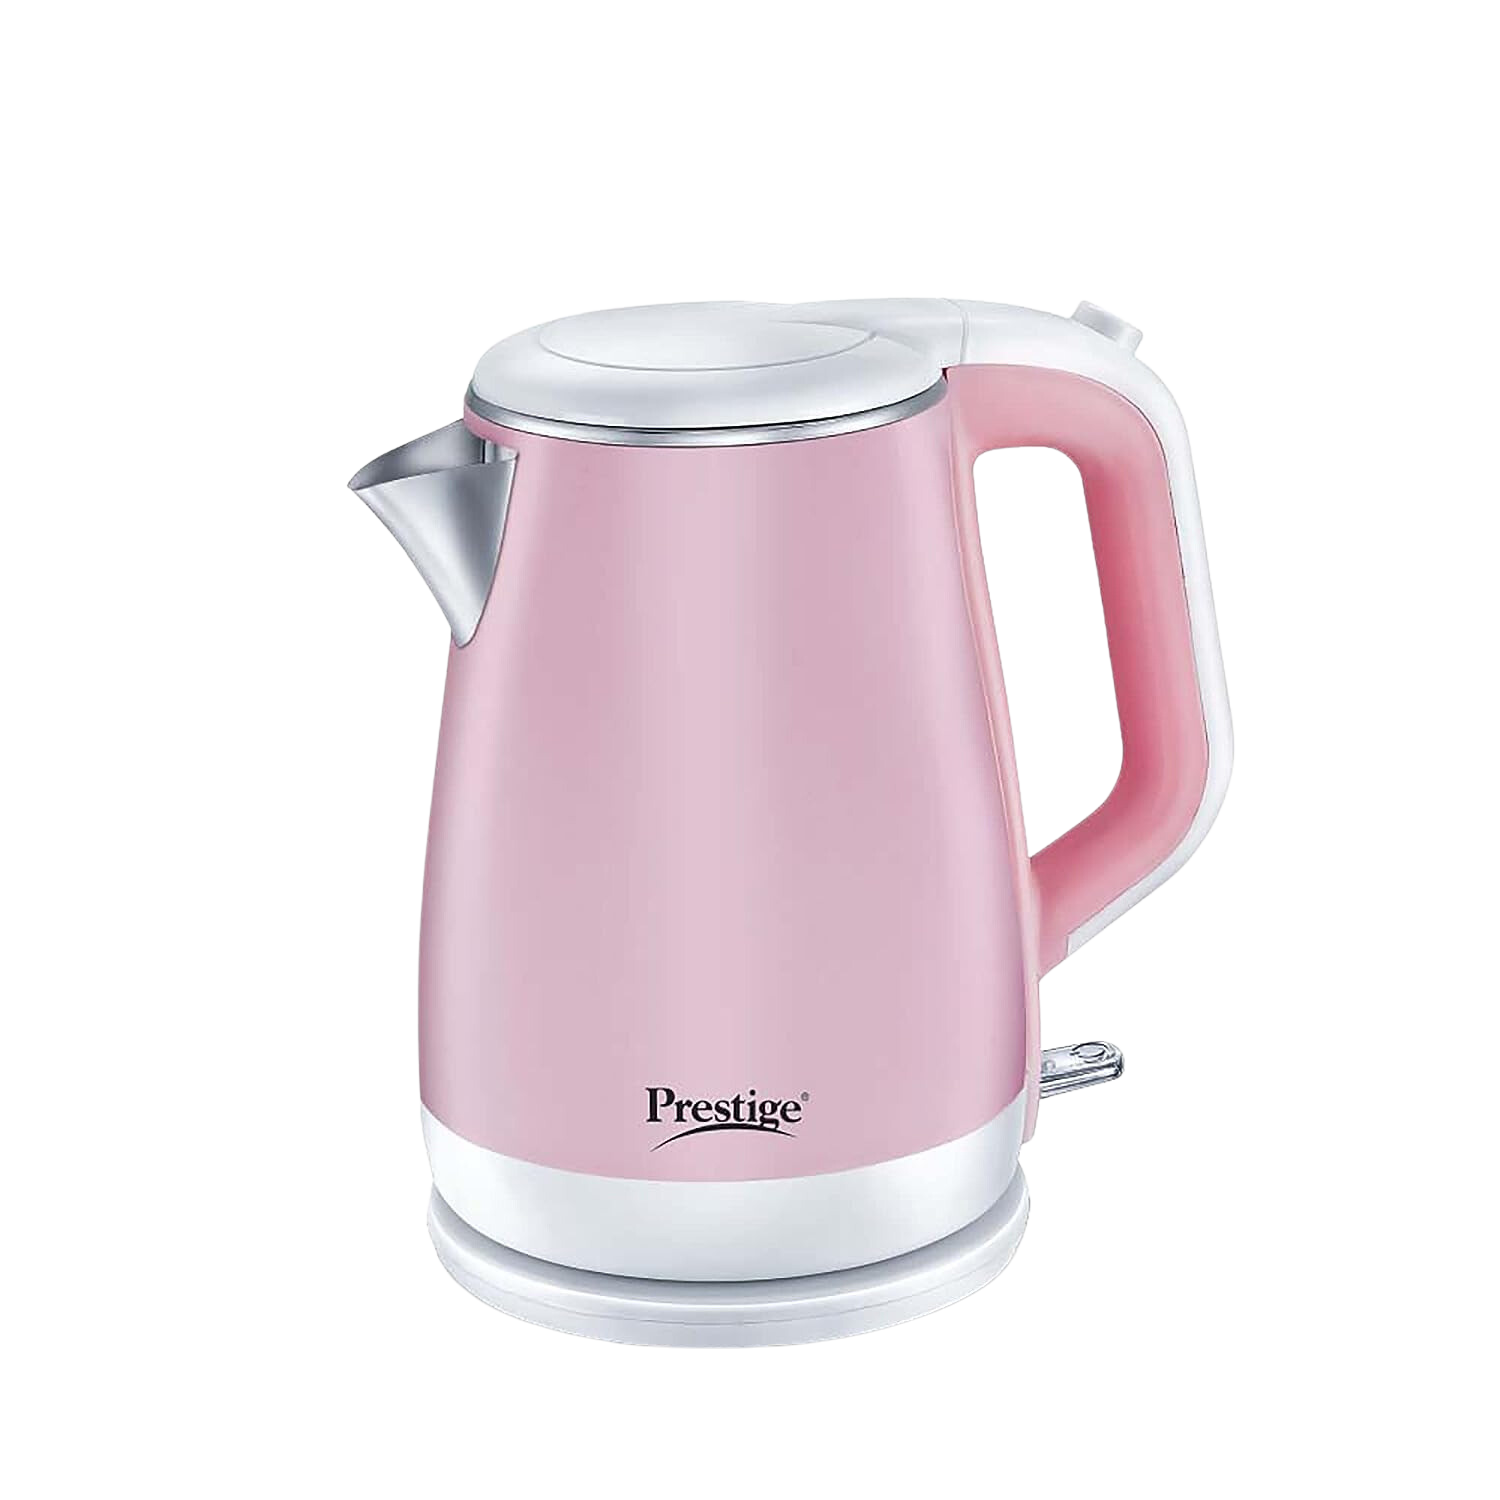 Prestige Electric Kettle PKPC 1.5 Ltr | Pink | 1500 Watt | With Concealed Element | - Premium electric kettles from Prestige - Just Rs. 1899! Shop now at Surana Sons